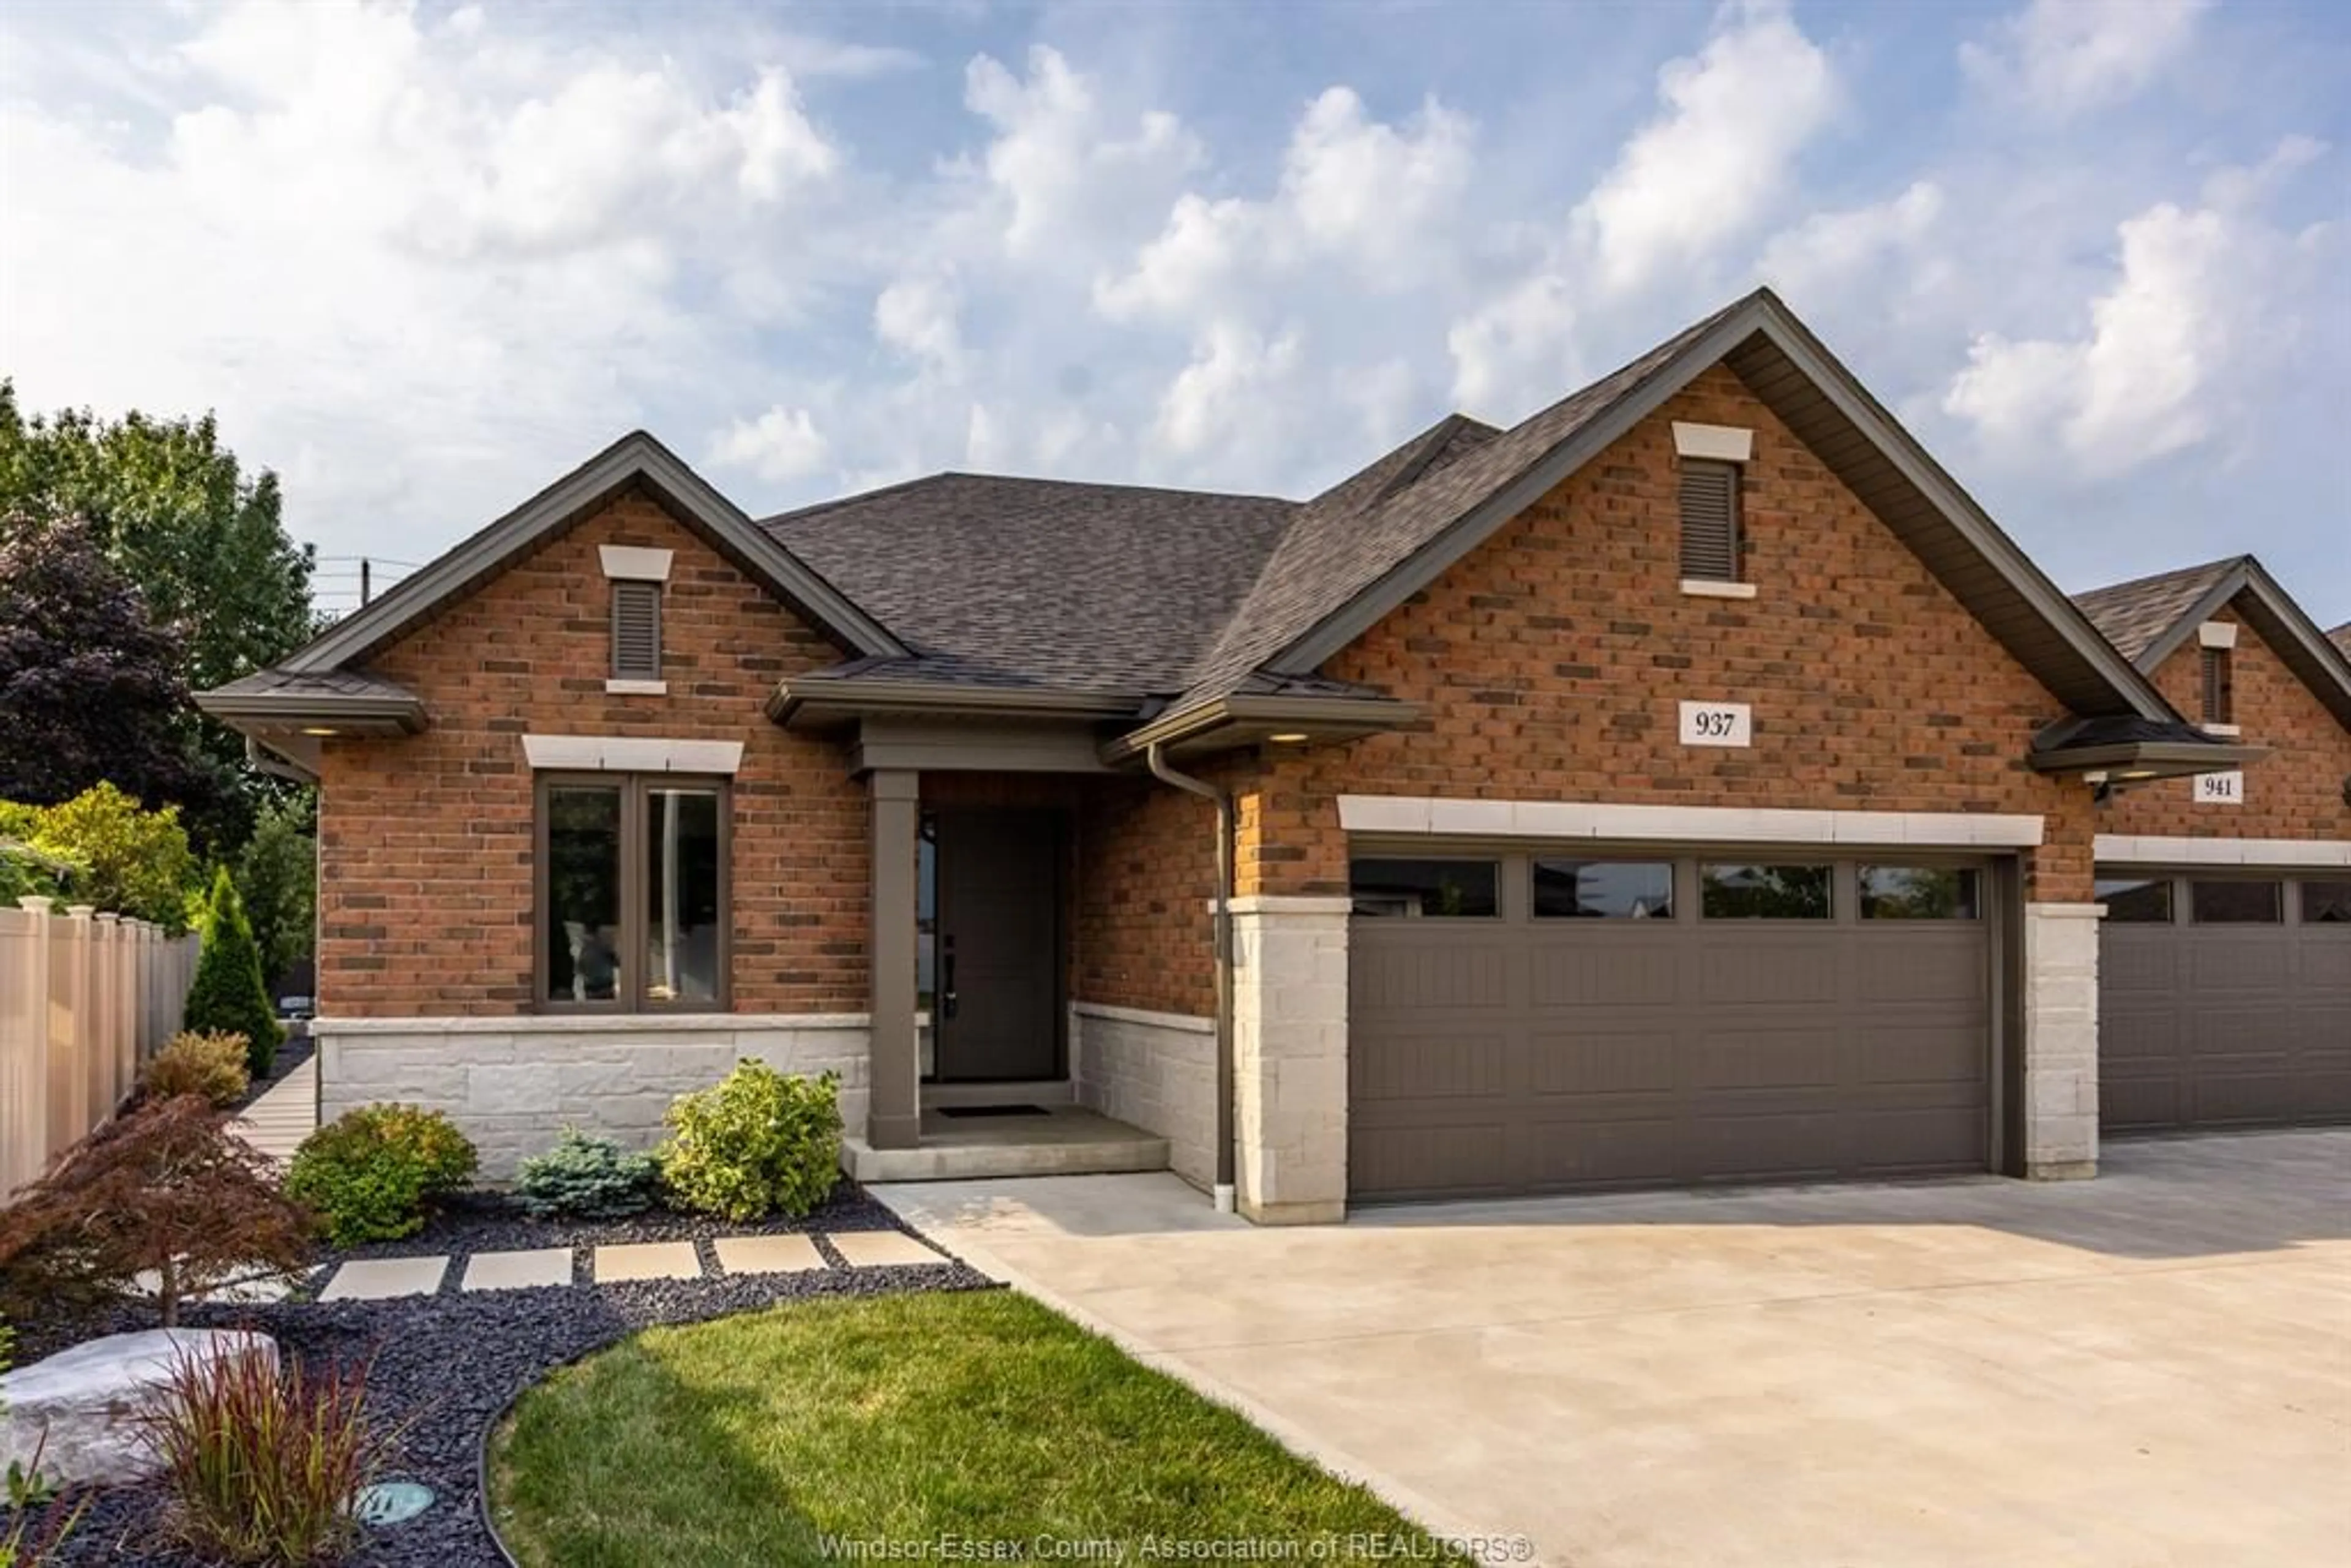 Home with brick exterior material for 937 Elmgate, LaSalle Ontario N9H 0L7